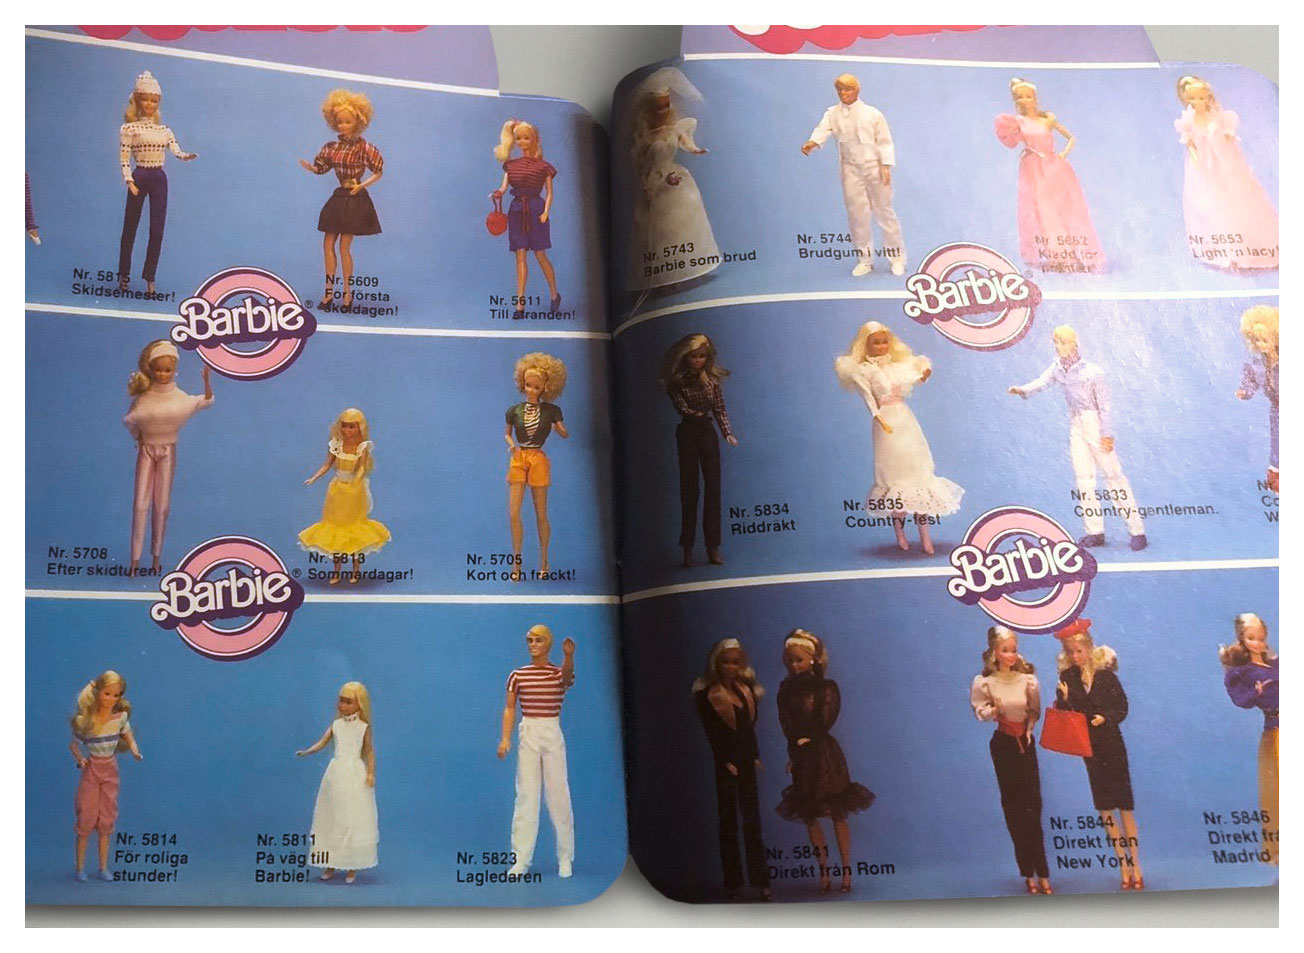 From 1983 Swedish Barbie booklet